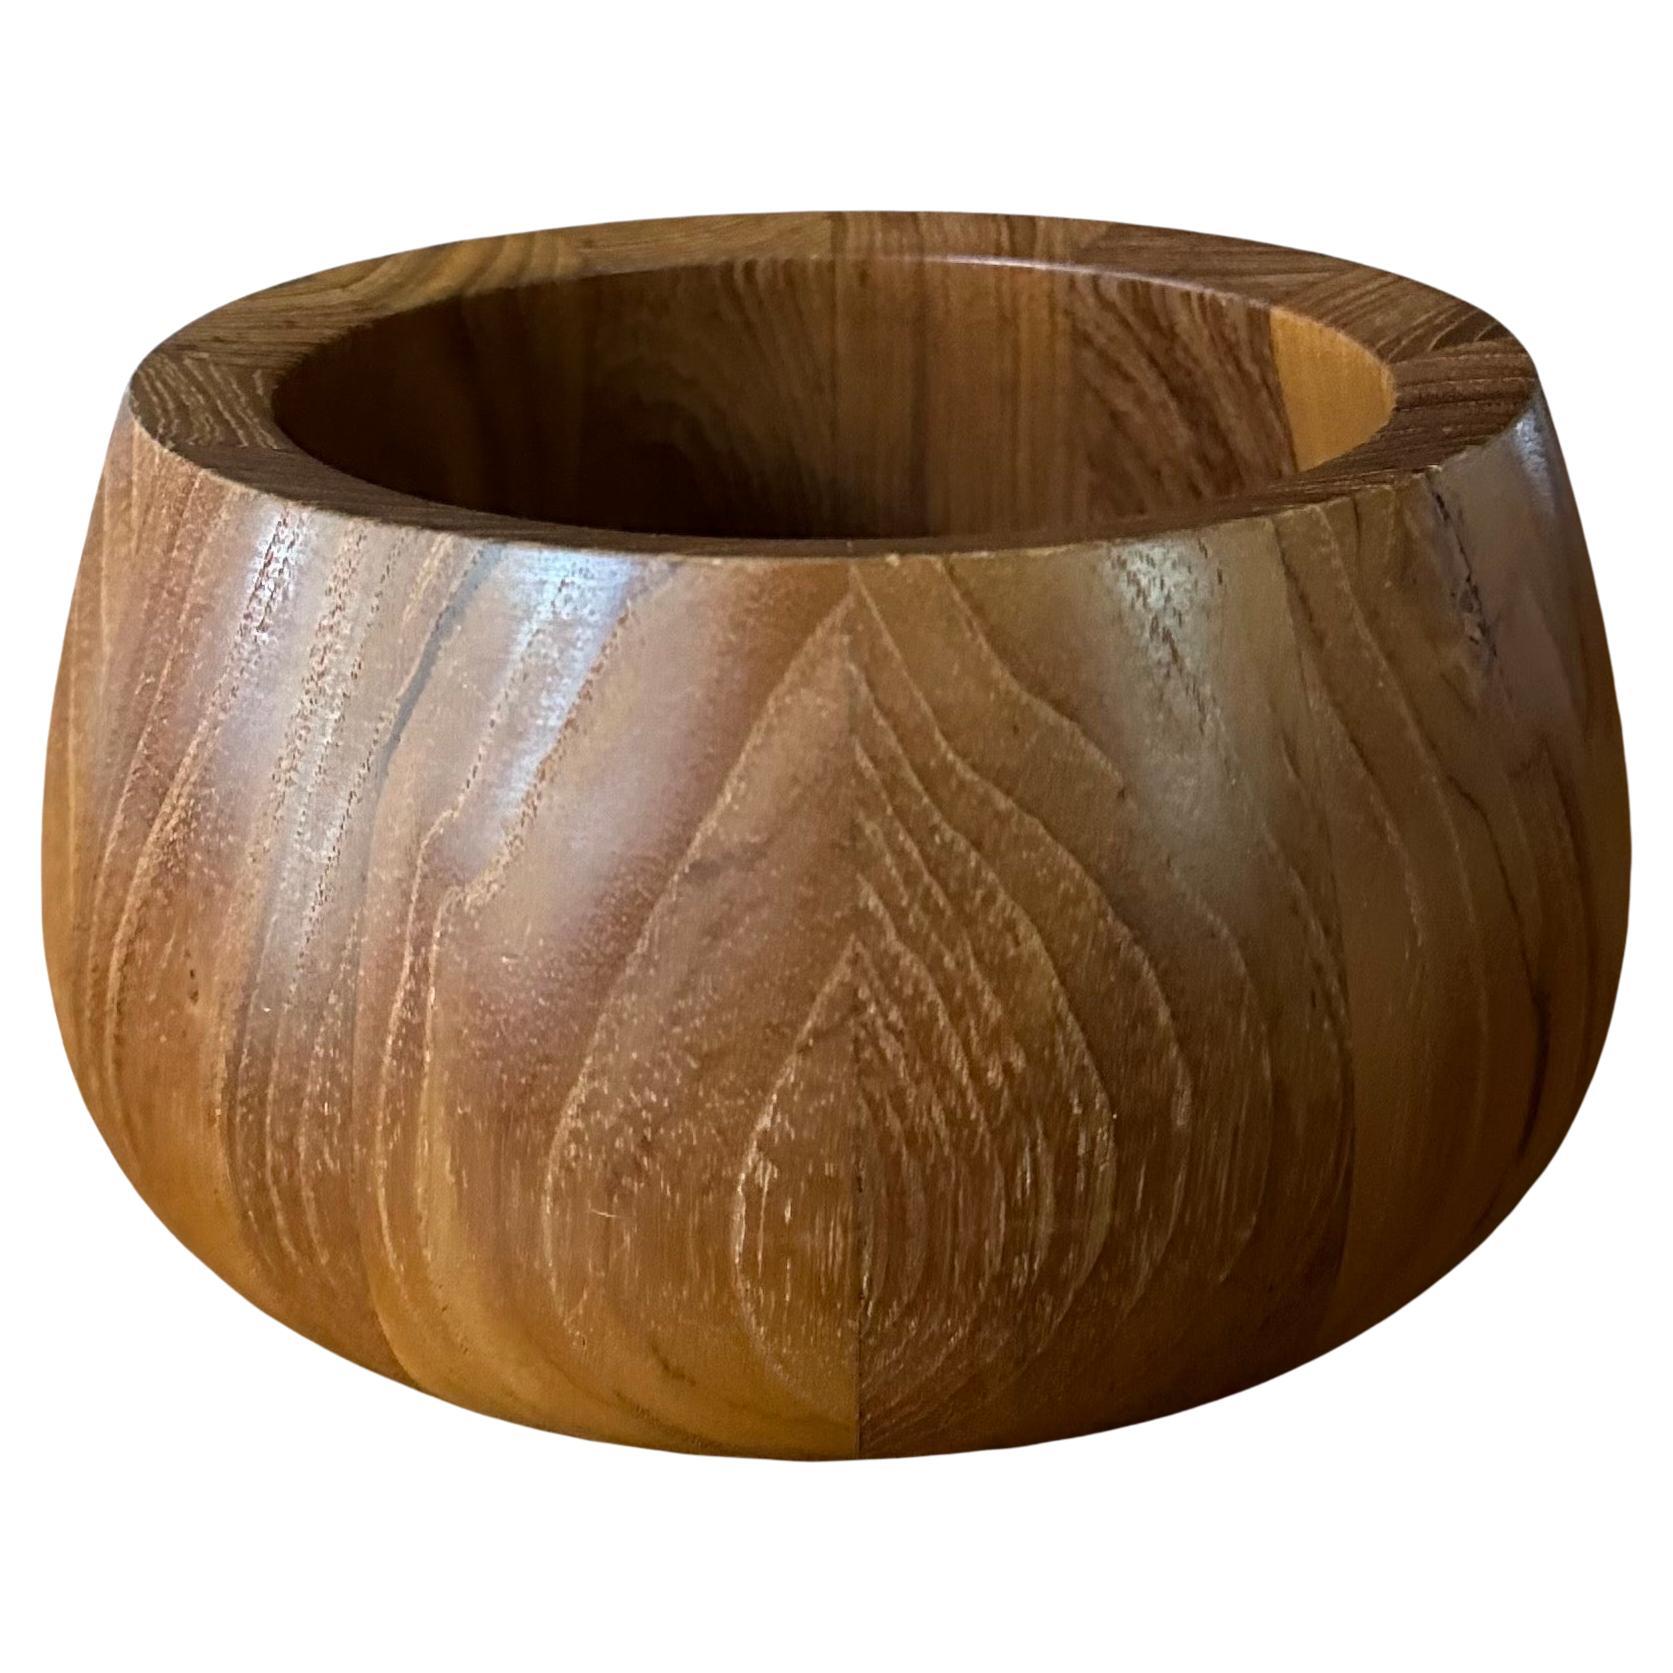 Small Staved Teak Bowl by Jens Quistgaard for Dansk For Sale